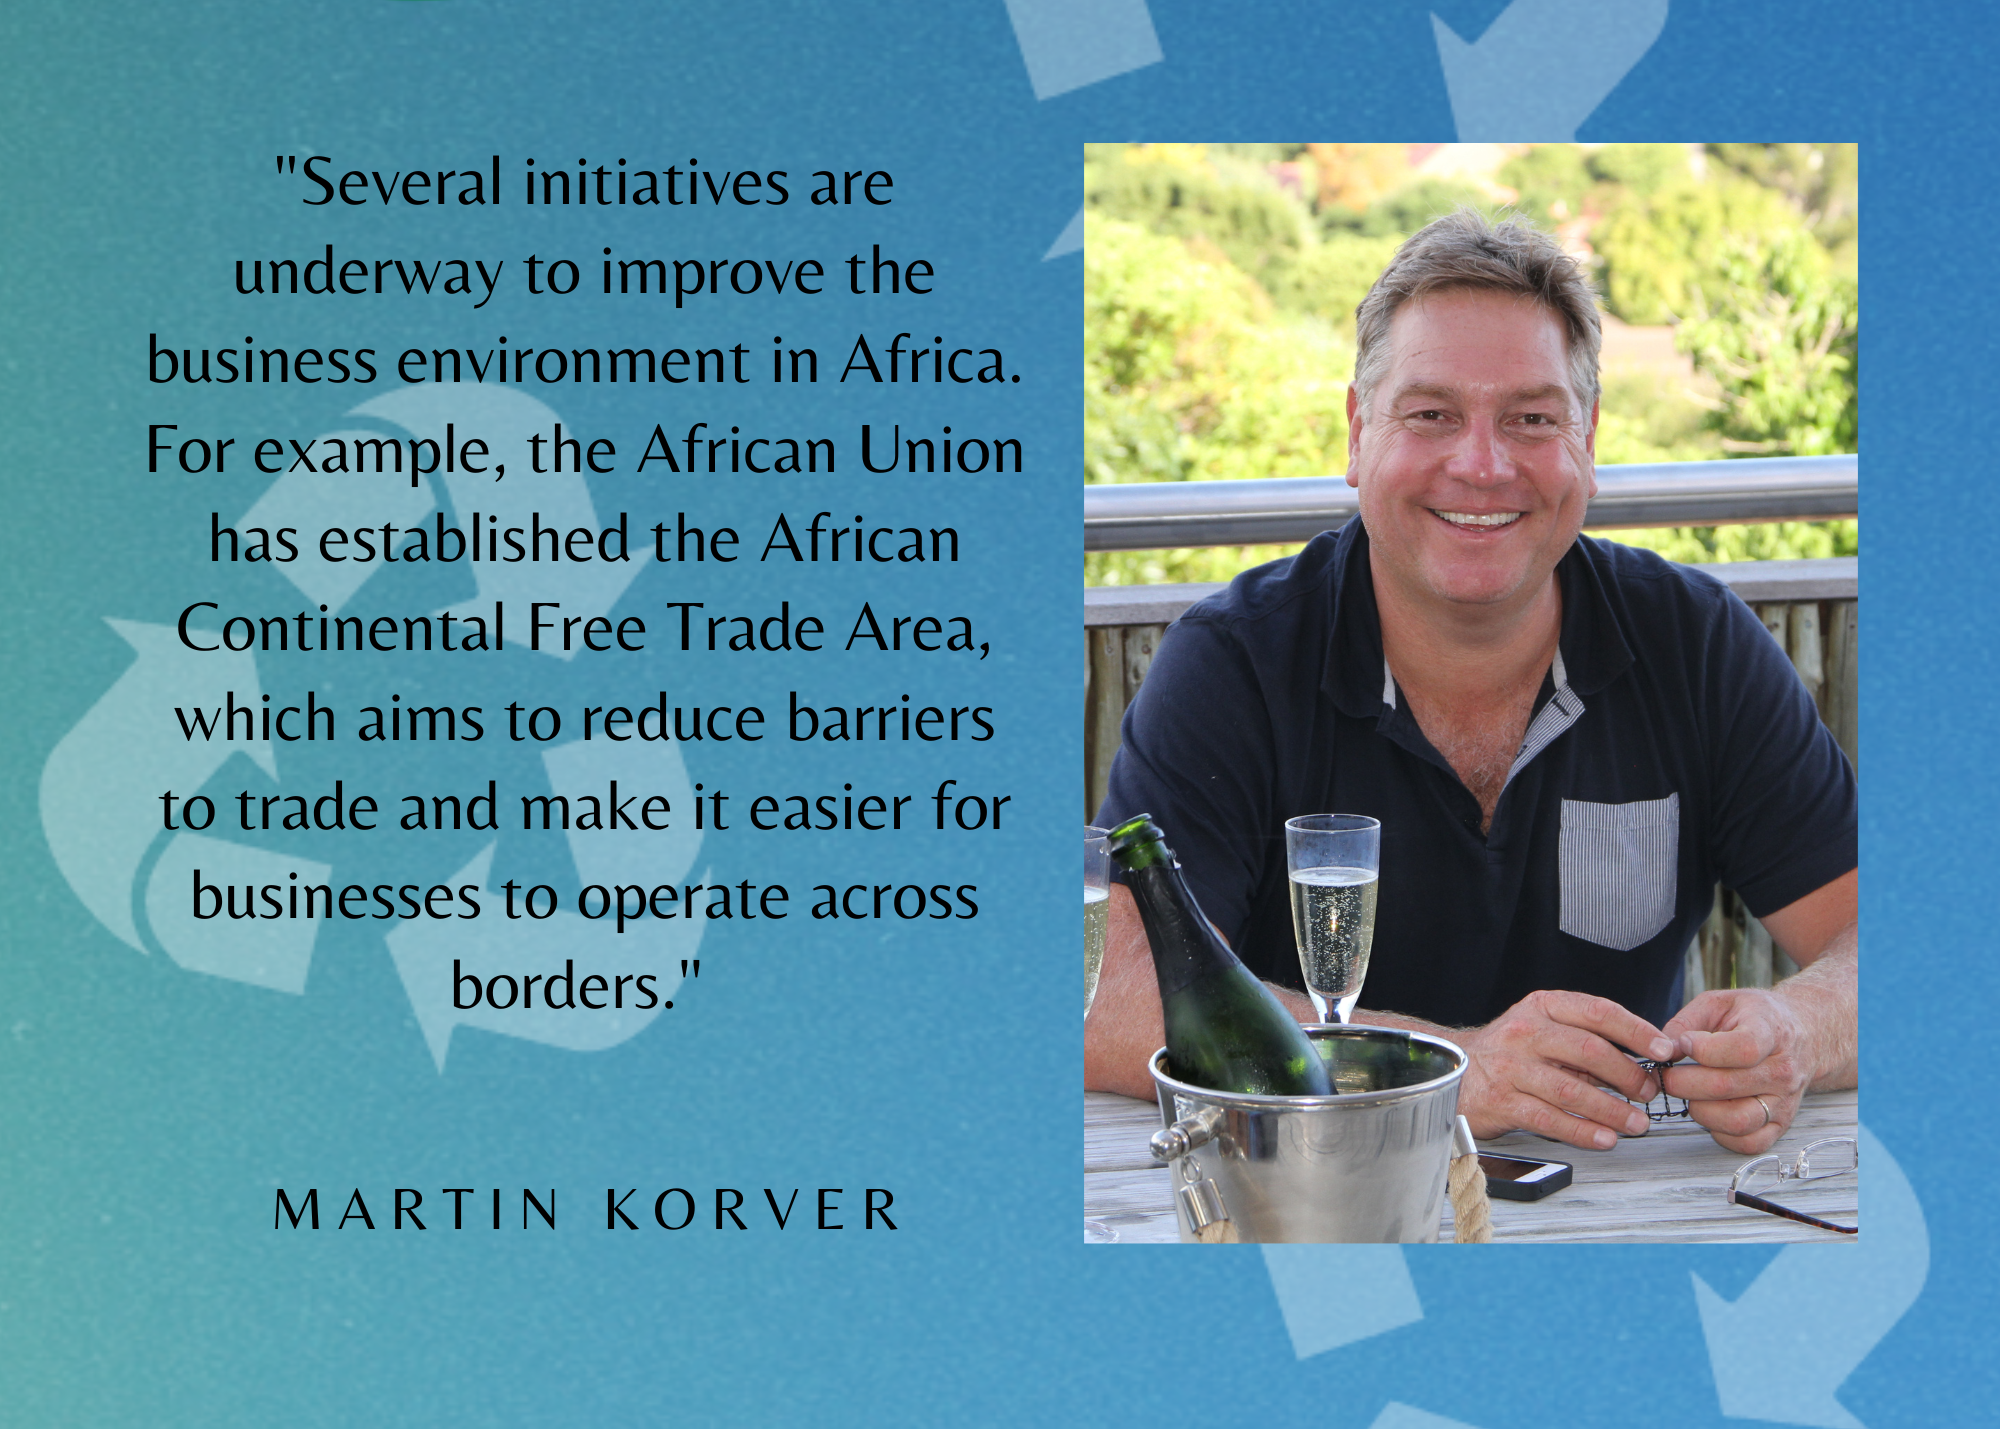 Successful Entrepreneur Martin Korver Collaborates to Produce a New Article Examining Startups in Africa